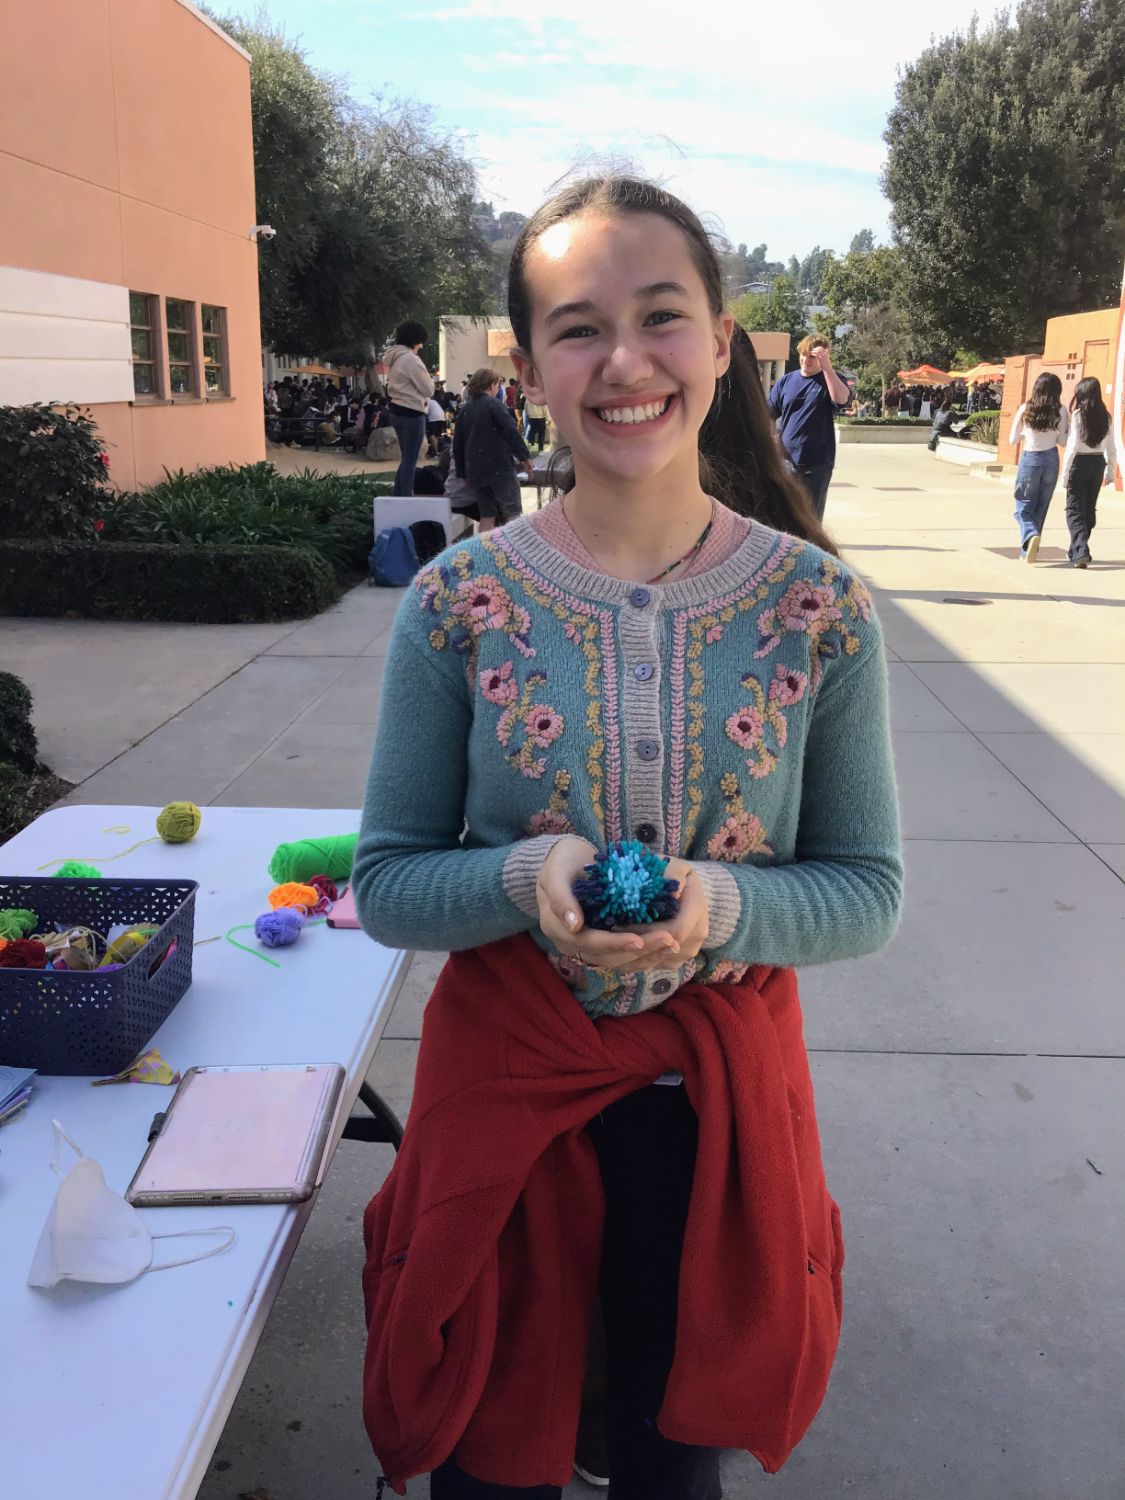 PHOTO: provided by South Pasadena Unified School District | The South Pasadenan | The SPHS Peer Mediators hosted a pom pom making craft during lunch at the high school. 